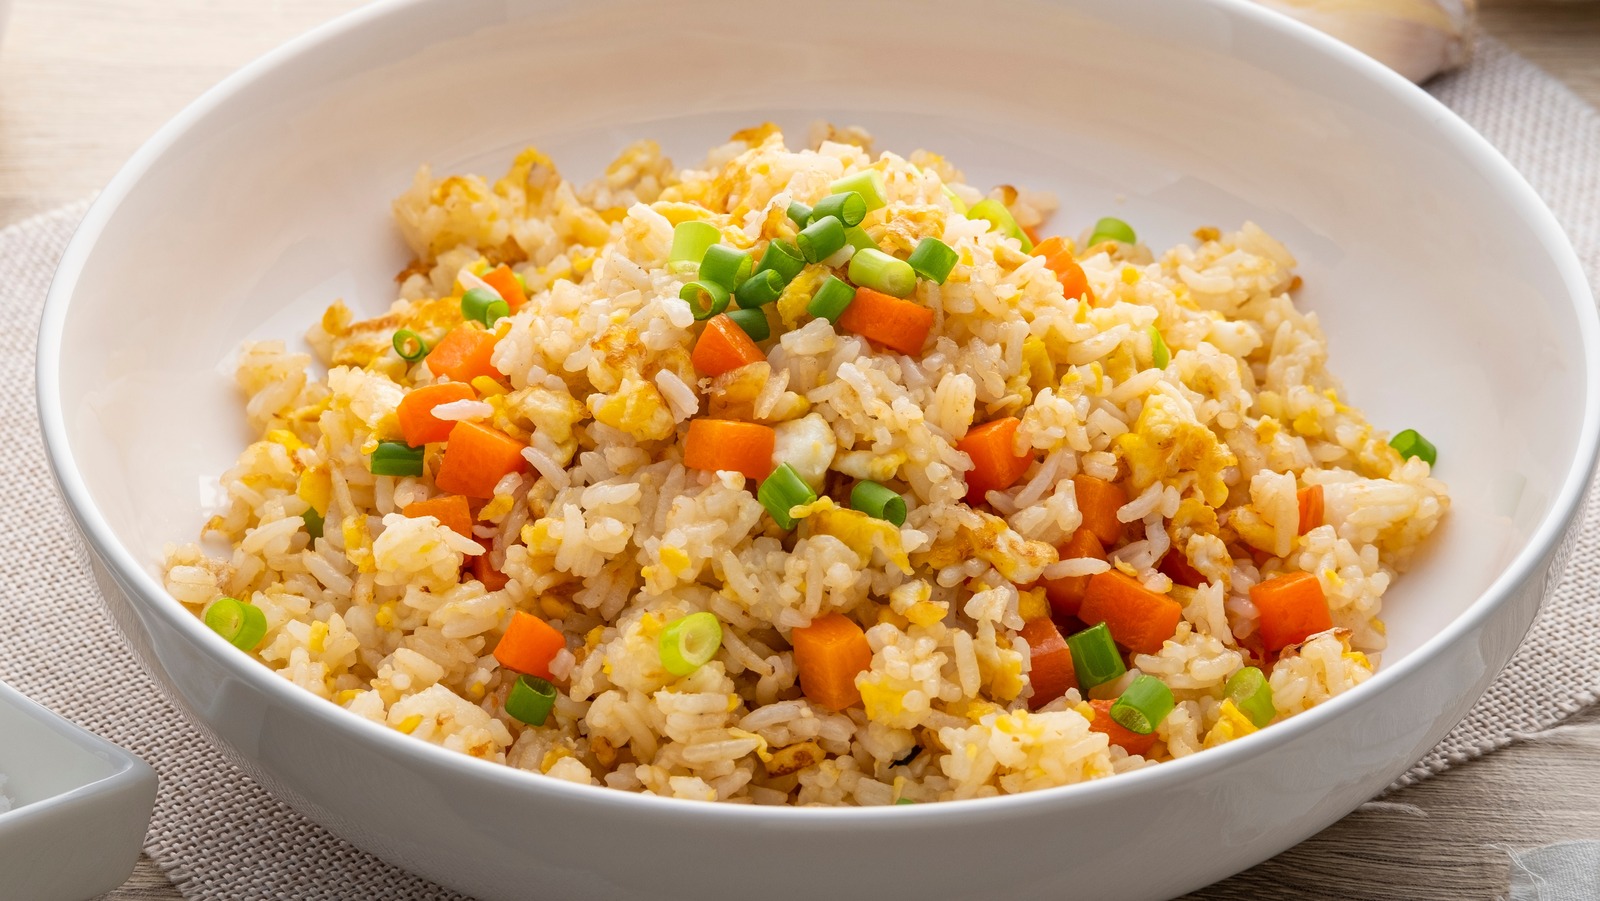 https://www.tastingtable.com/img/gallery/sugar-is-the-secret-ingredient-for-fried-rice-that-rivals-takeout/l-intro-1694043415.jpg